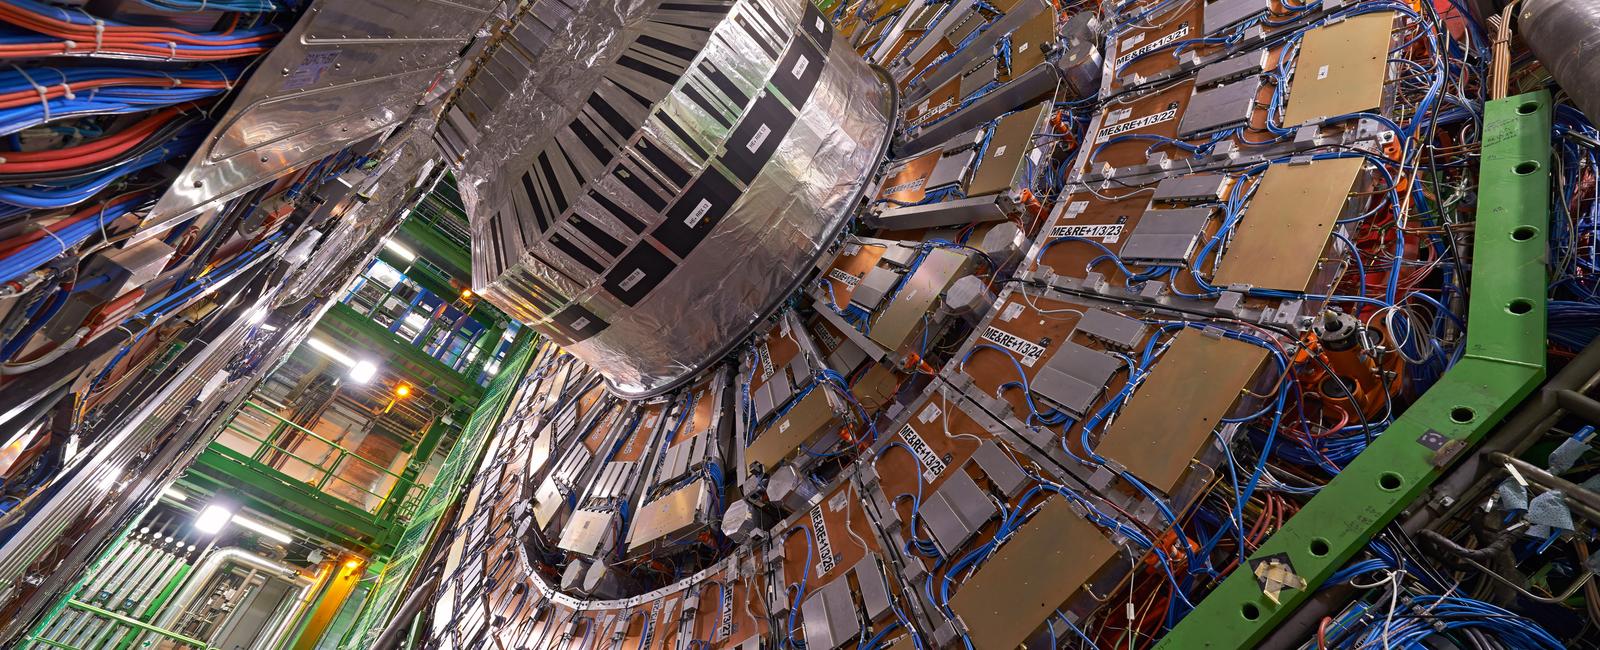 Europe s next particle accelerator will be three times larger than cern s large hadron collider and smash particles together with the power of about 10 million lightning strikes